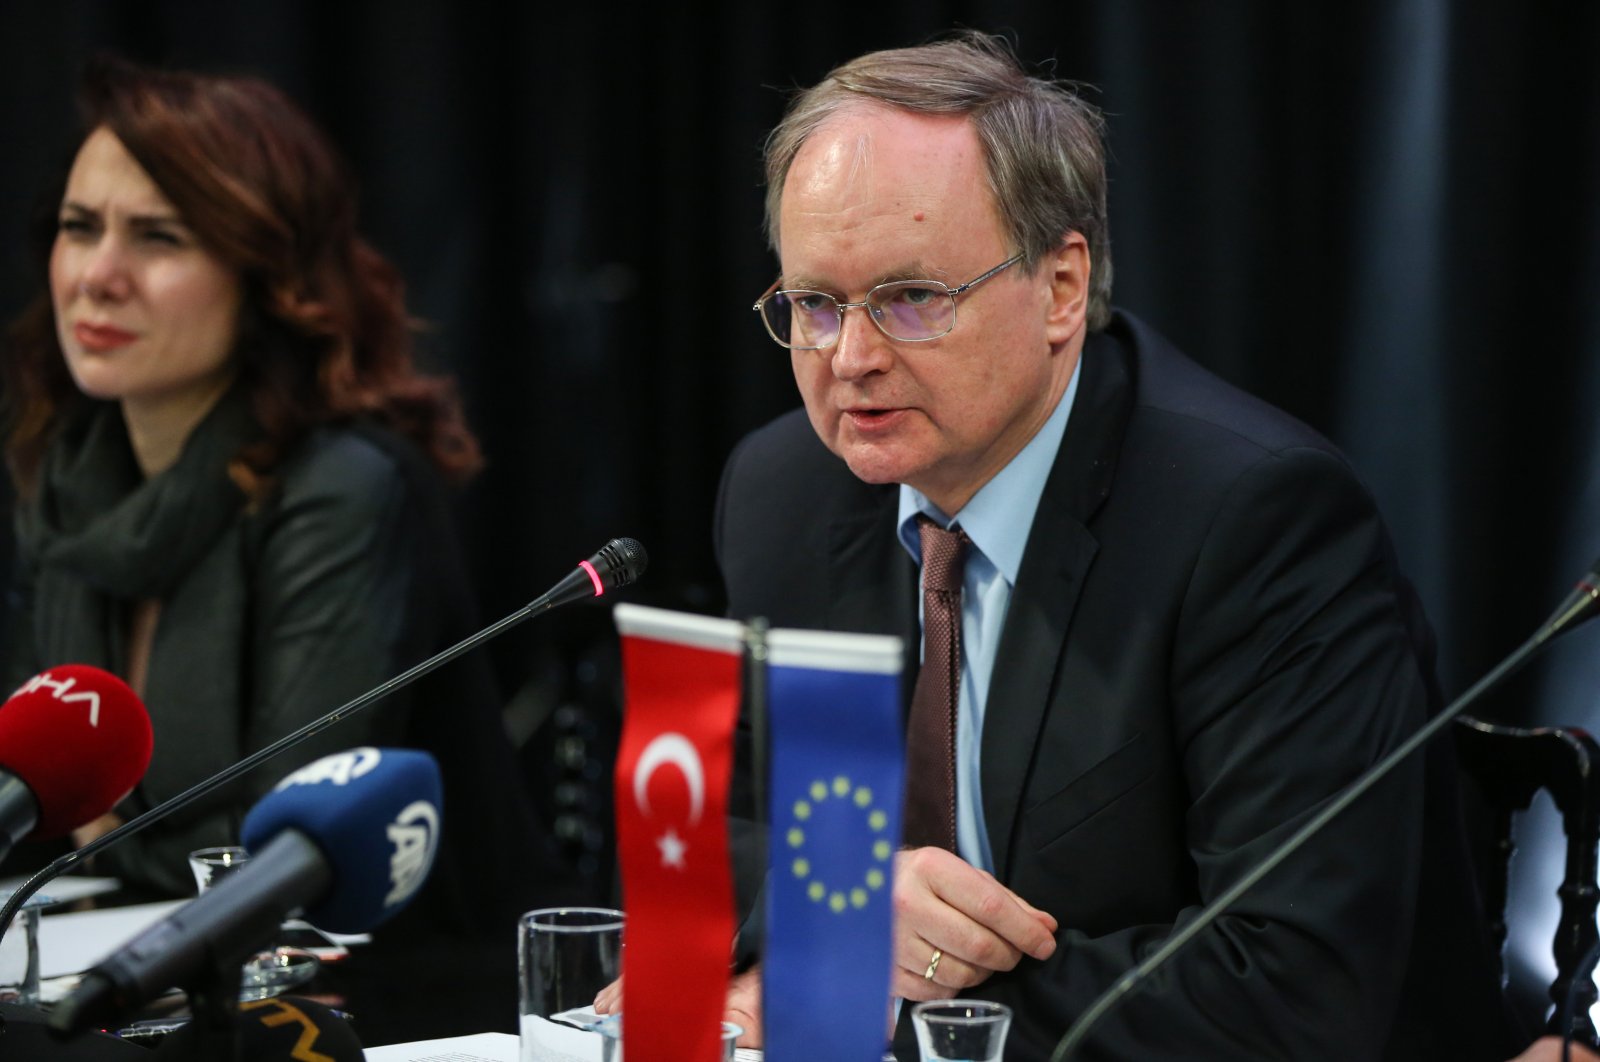 The head of EU delegation to Turkey, Christian Berger, speaks at a news conference on March 25, 2019. (AA File Photo)